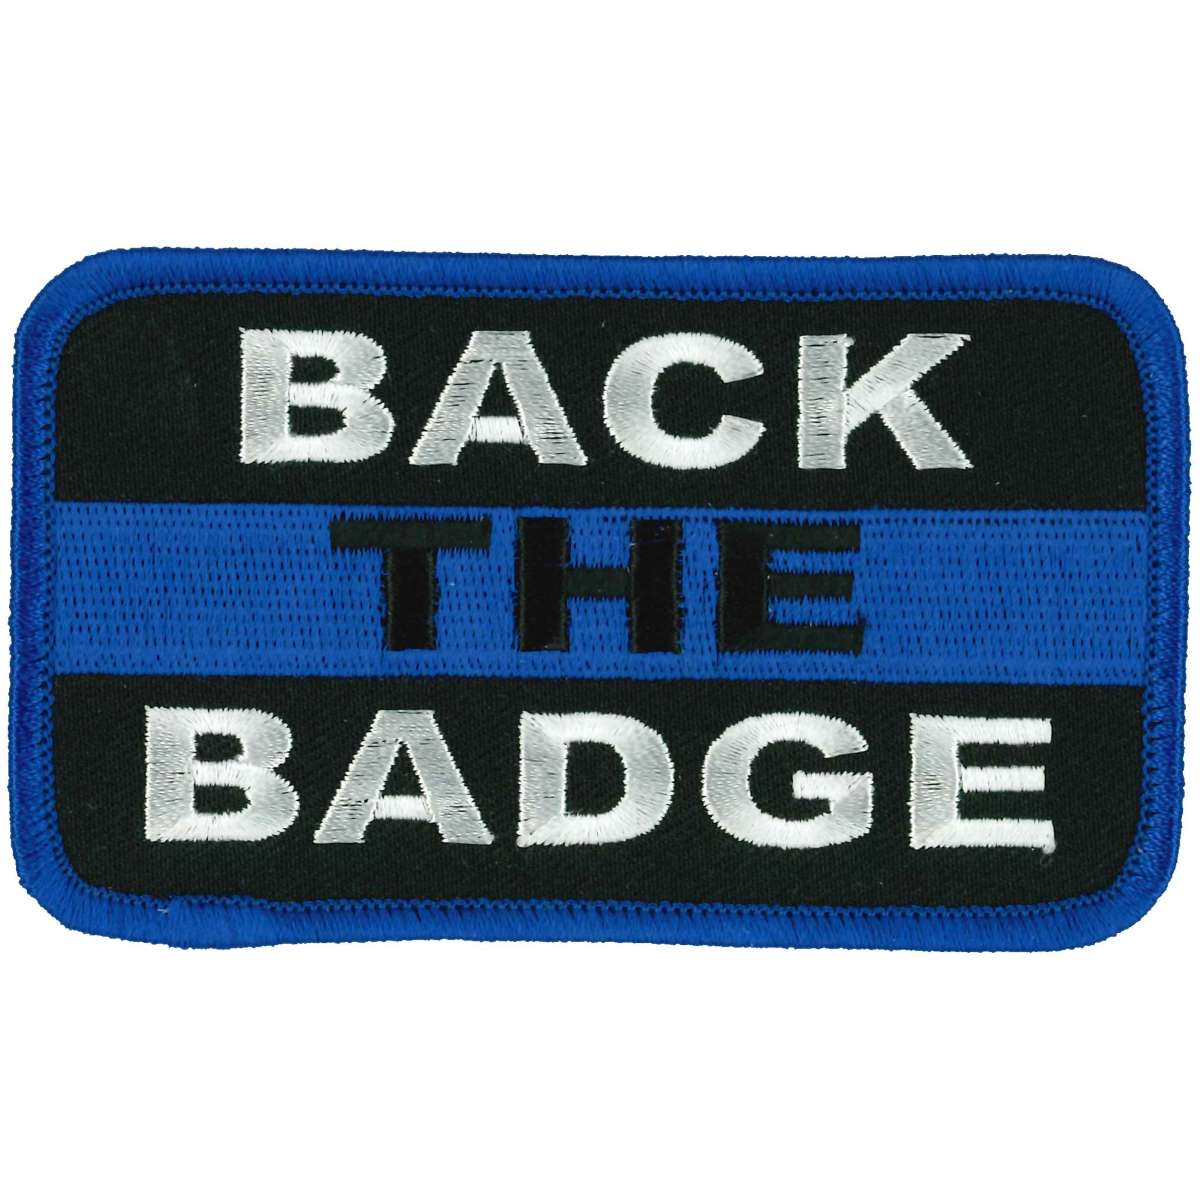 Hot Leathers Back the Badge 4" X 3" Patch PPL9872